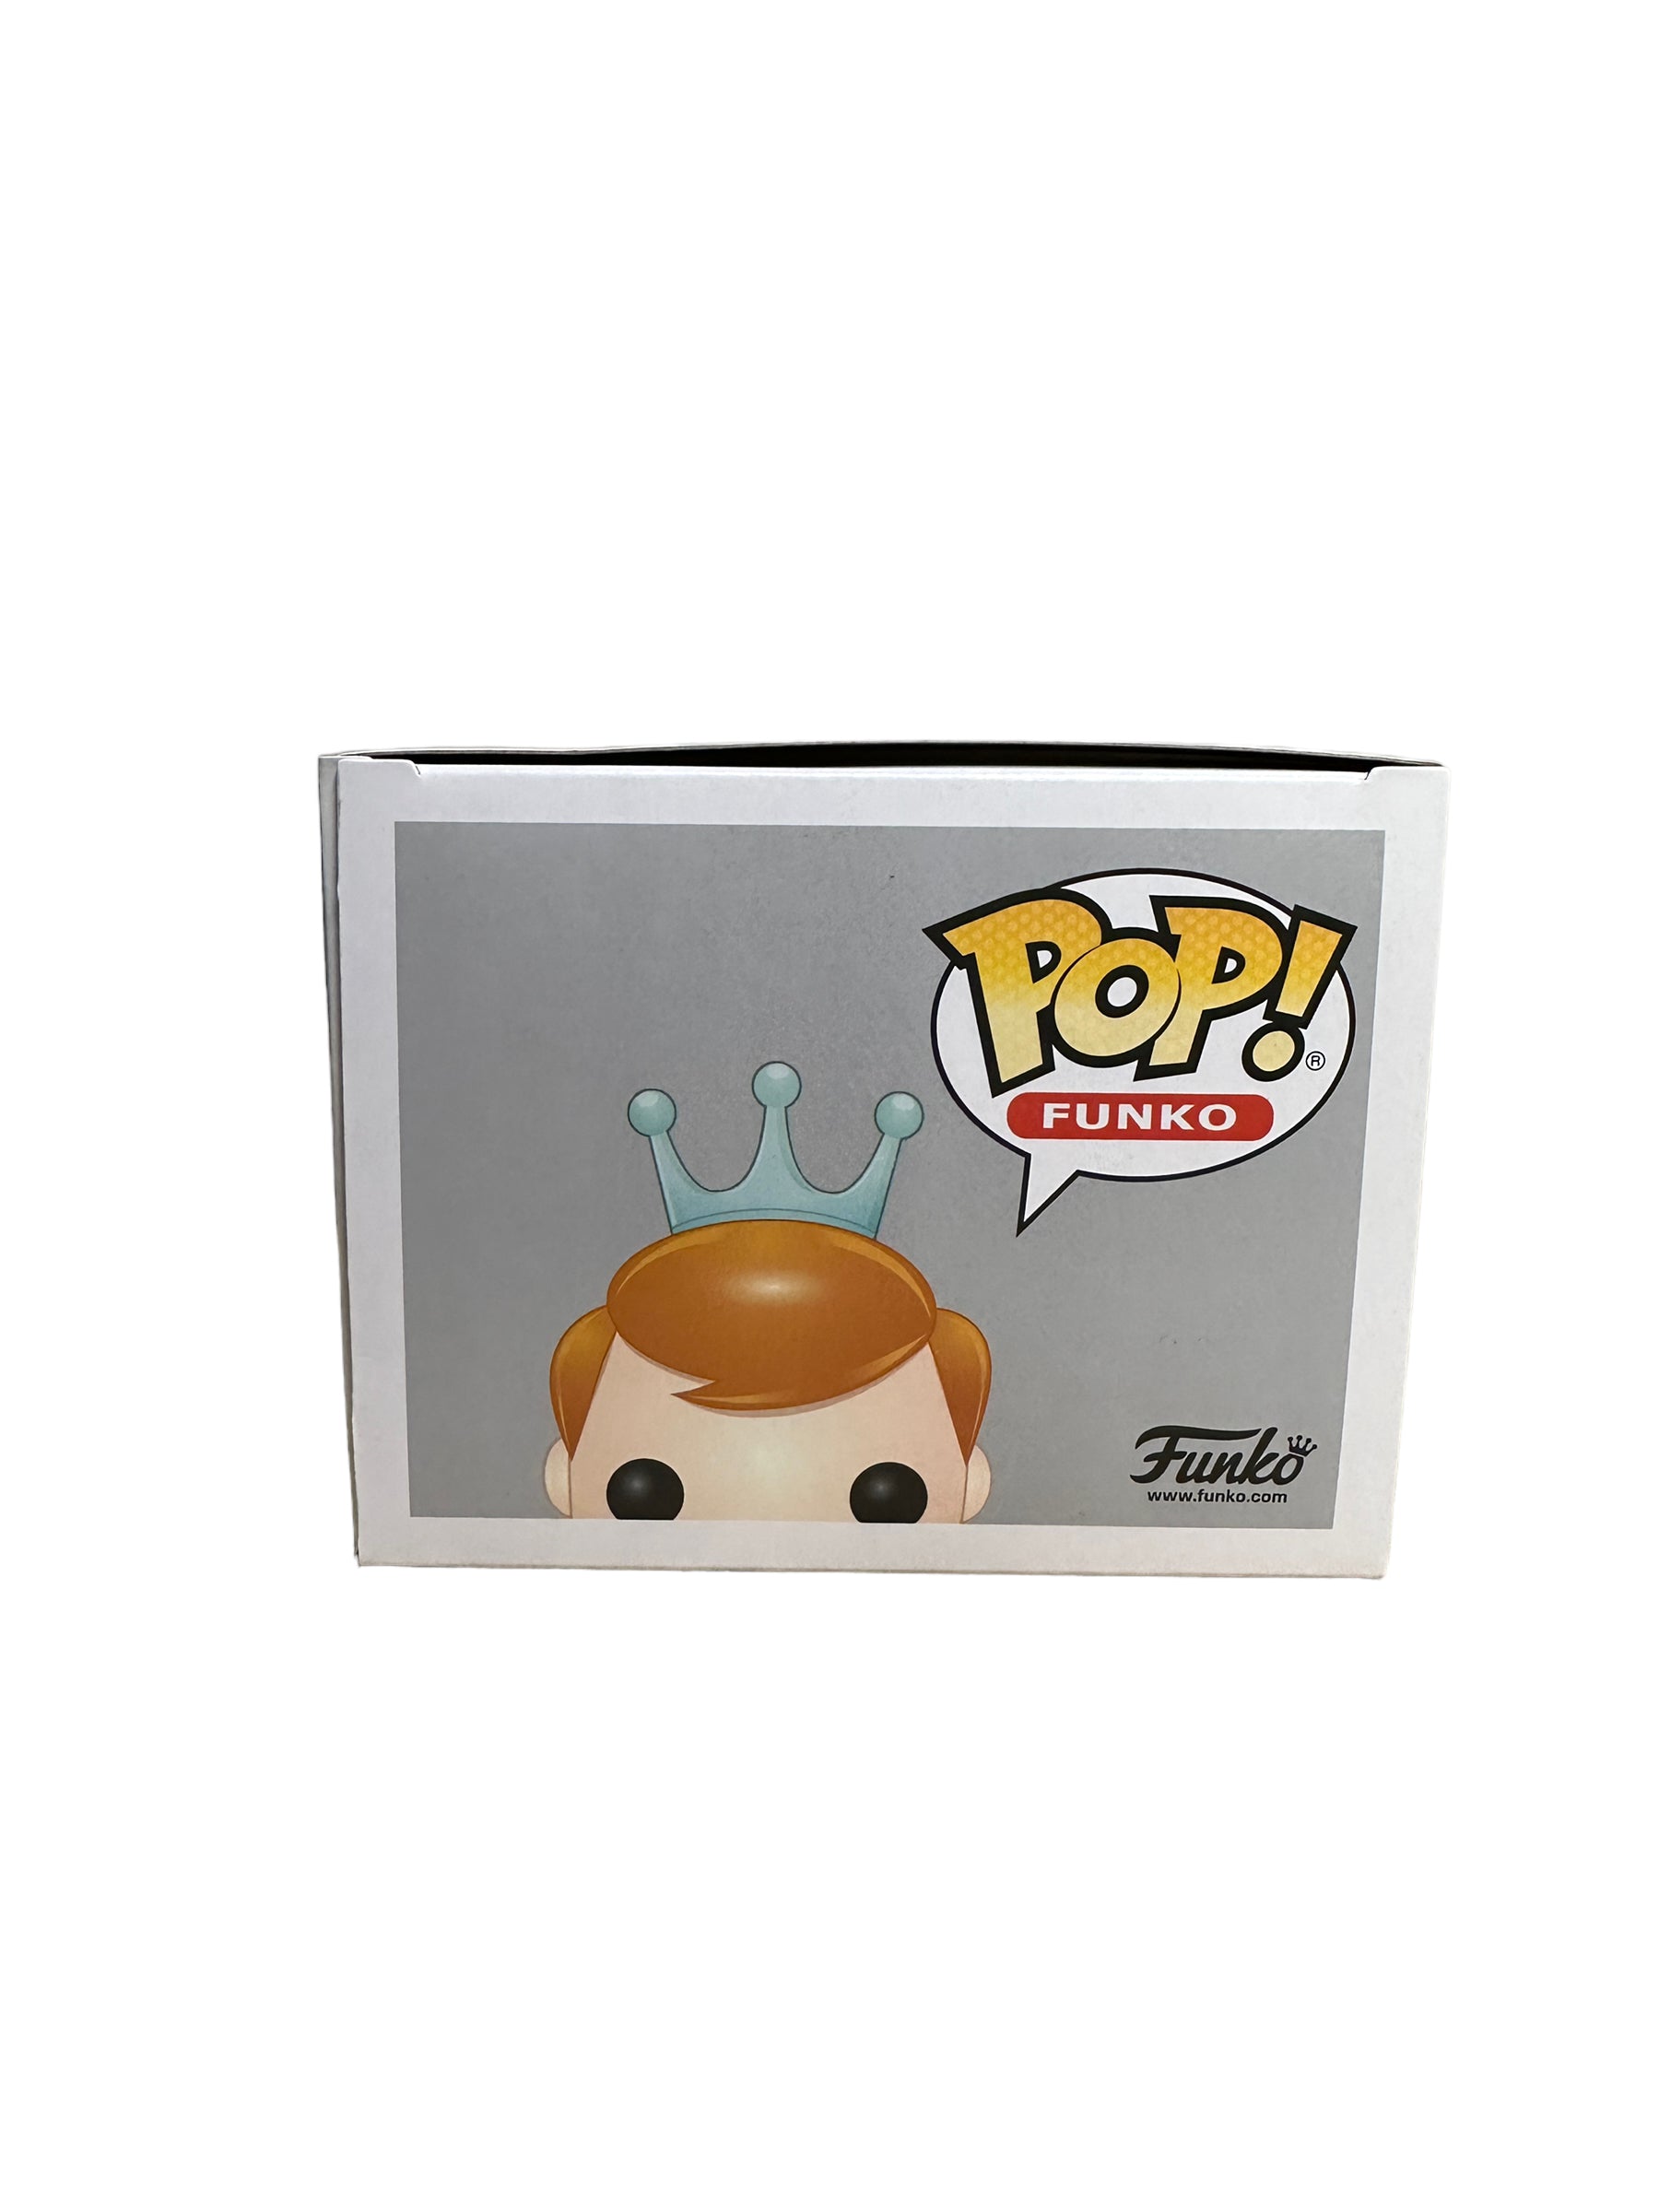 Freddy Funko as Man of Steel Funko Pop! - SDCC 2017 Exclusive LE525 Pcs - Condition 8.5/10